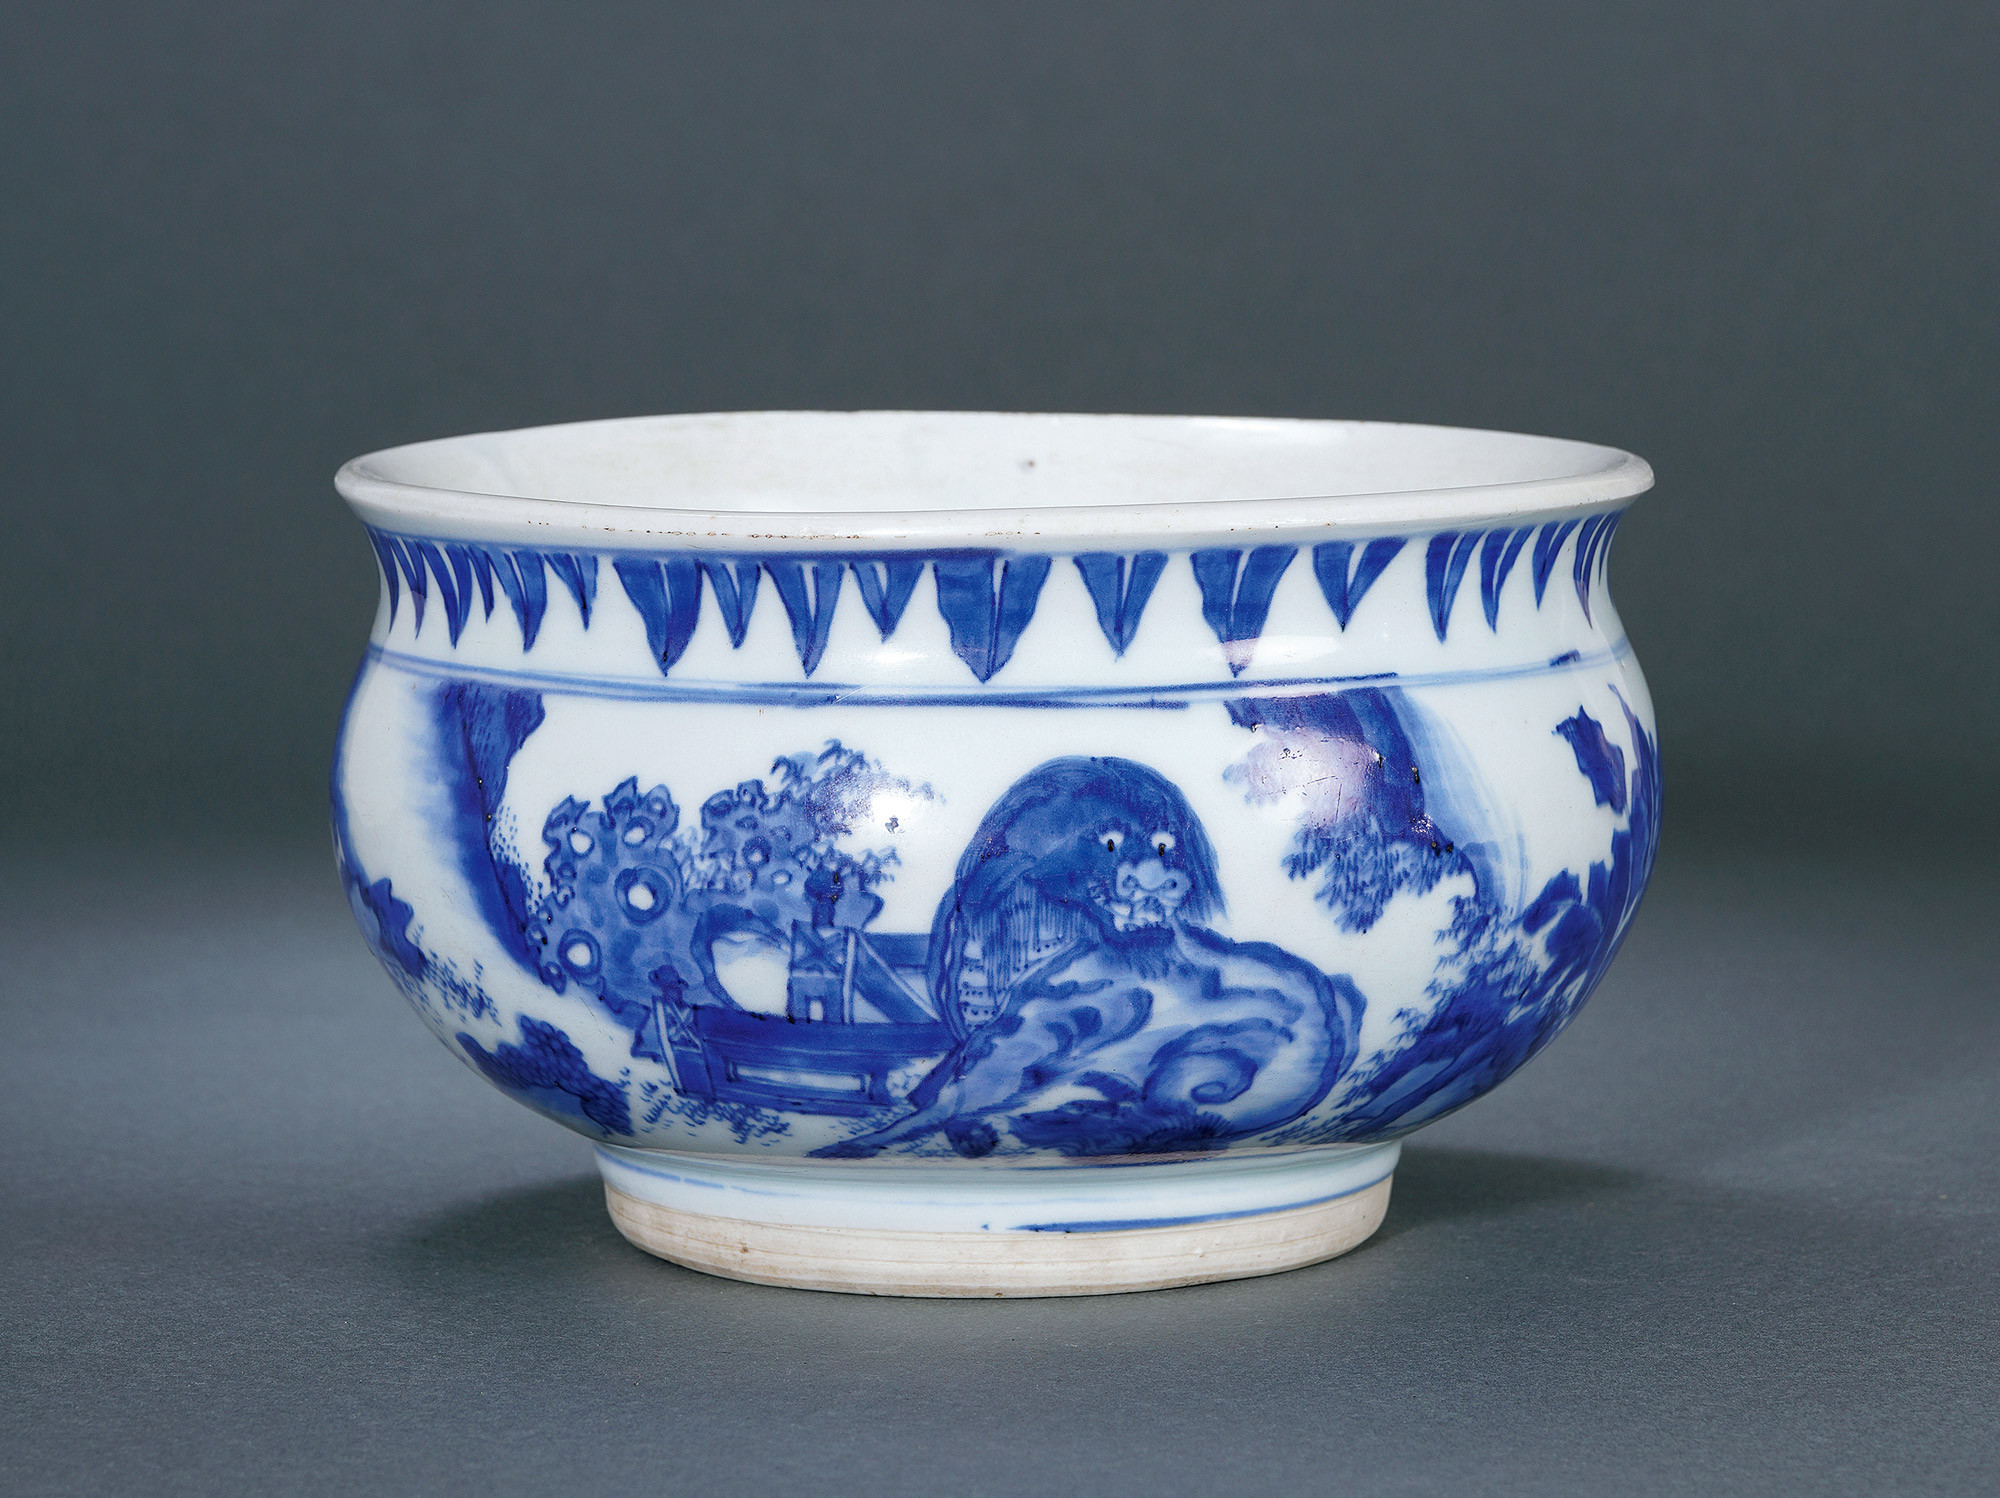 A BLUE AND WHITE INCENSE BURNER WITH MYSTICAL BEAST DESIGN